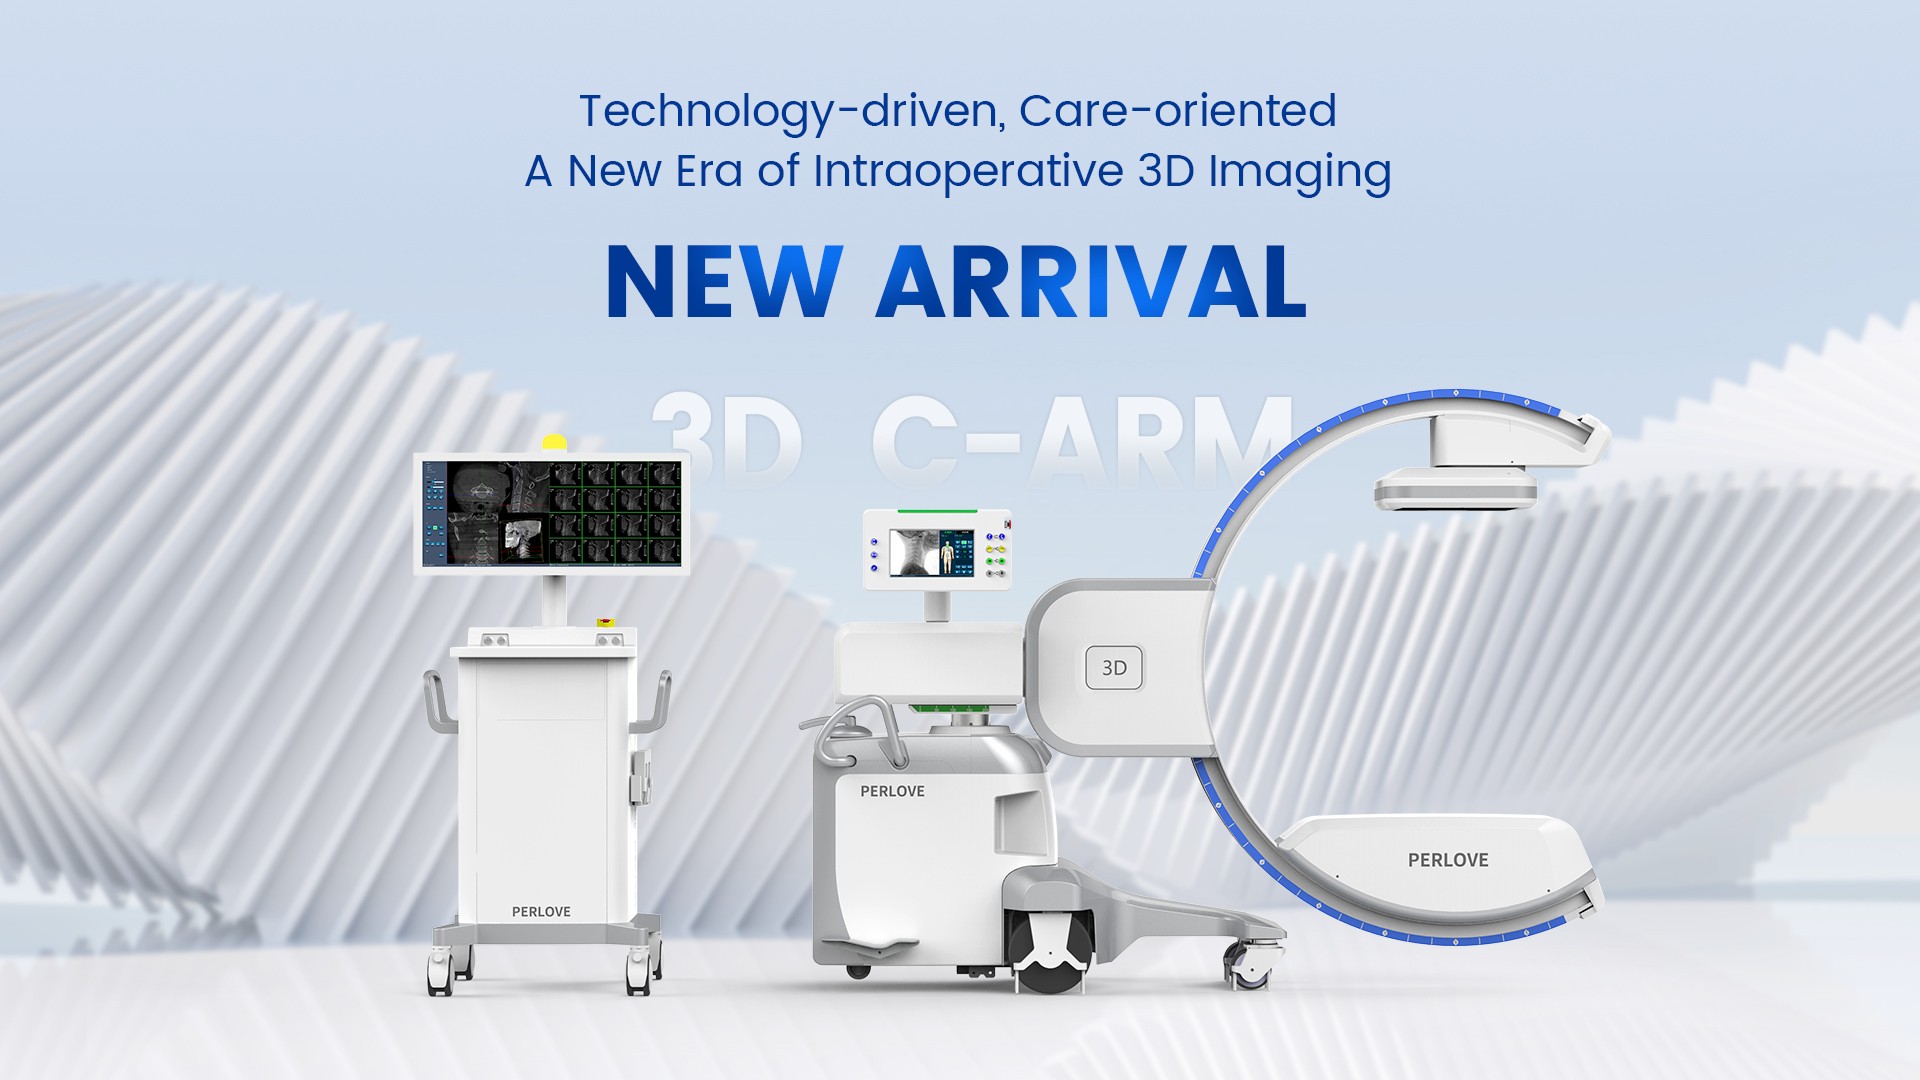 New Arrival: Perlove Medical Launched the Third Generation of Mobile 3D C-arms PLX C7600